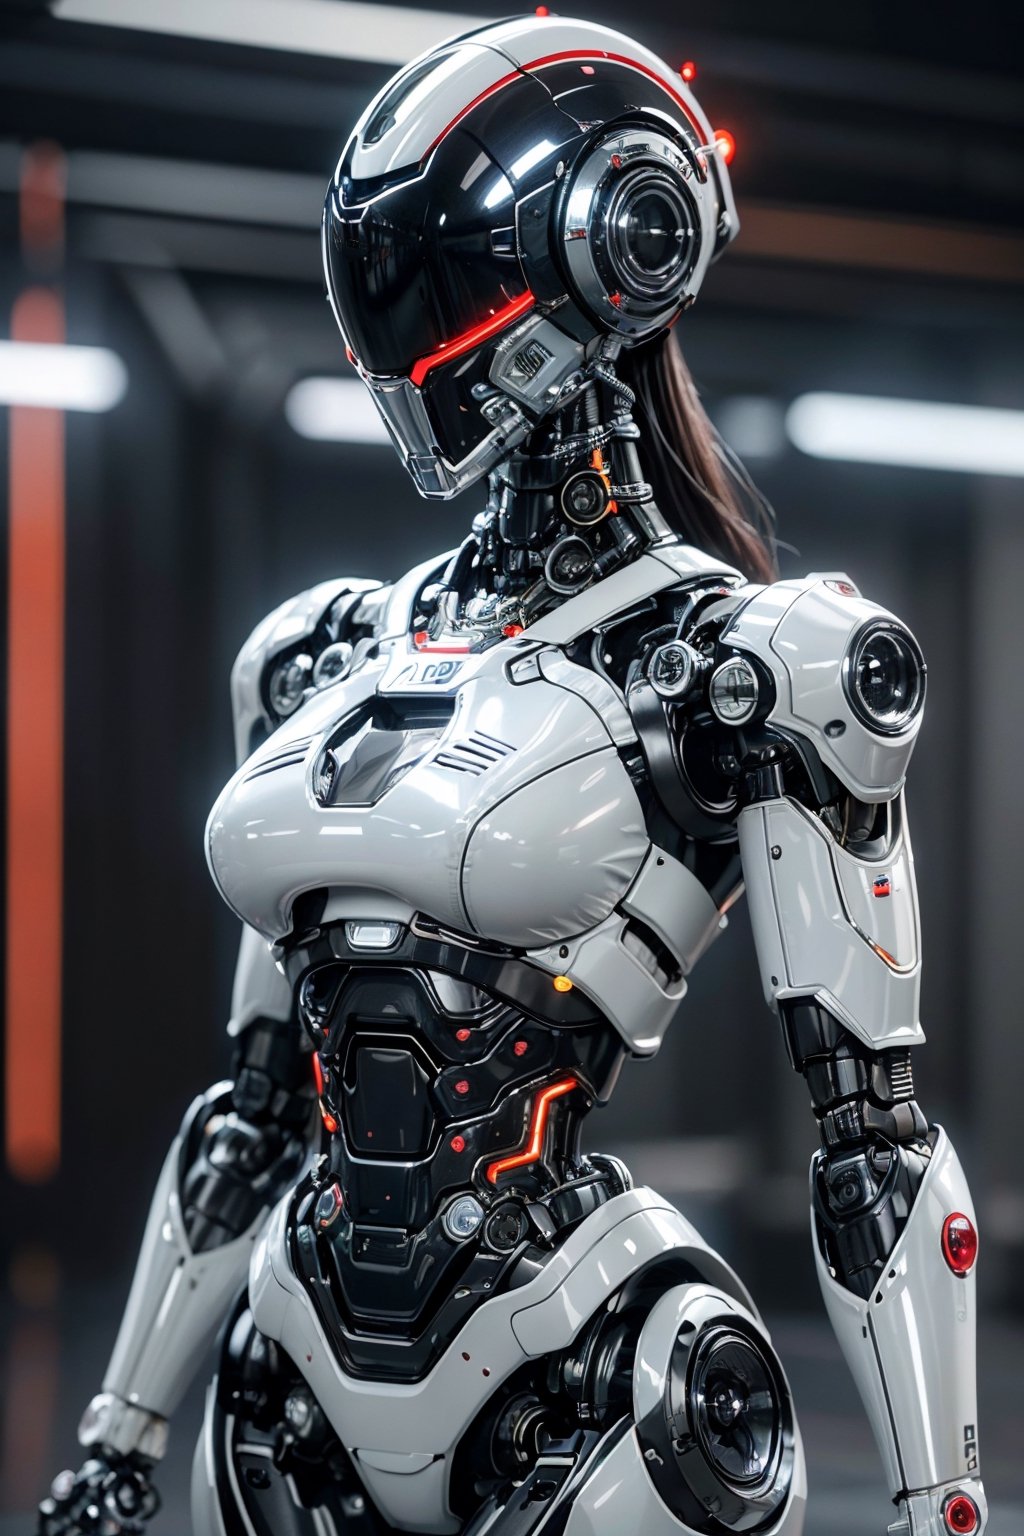 ((high resolution)), ((8K)), ((incredibly absurdres)), break. (super detailed dark metallic skin), (an extremely delicate and beautiful:1.3) ,break, ((1robot:1.5)), ((curvy body)), (large breasts), (beautiful hand), ((black metalic body:1.3)) , ((cyber helmet with full-face mask:1.4)) ,break. ((Long hair:1.3)) , (red glowing lines on one's black body:1.2), break. ((intricate internal structure)), ((black red parts:1.5)), break. ((robotic face:1.2)), red eyes,  (robotic arms), (robotic legs), (robotic hands), ((robotic joint:1.2)), (Cinematic angle), (ultra fine quality), (masterpiece), (best quality), (incredibly absurdres), (highly detailed), highres, high detail eyes, high detail background, sharp focus, (photon mapping, radiosity, physically-based rendering, automatic white balance), masterpiece, best quality, ((black Mecha body)), furure_urban, incredibly absurdres,science fiction